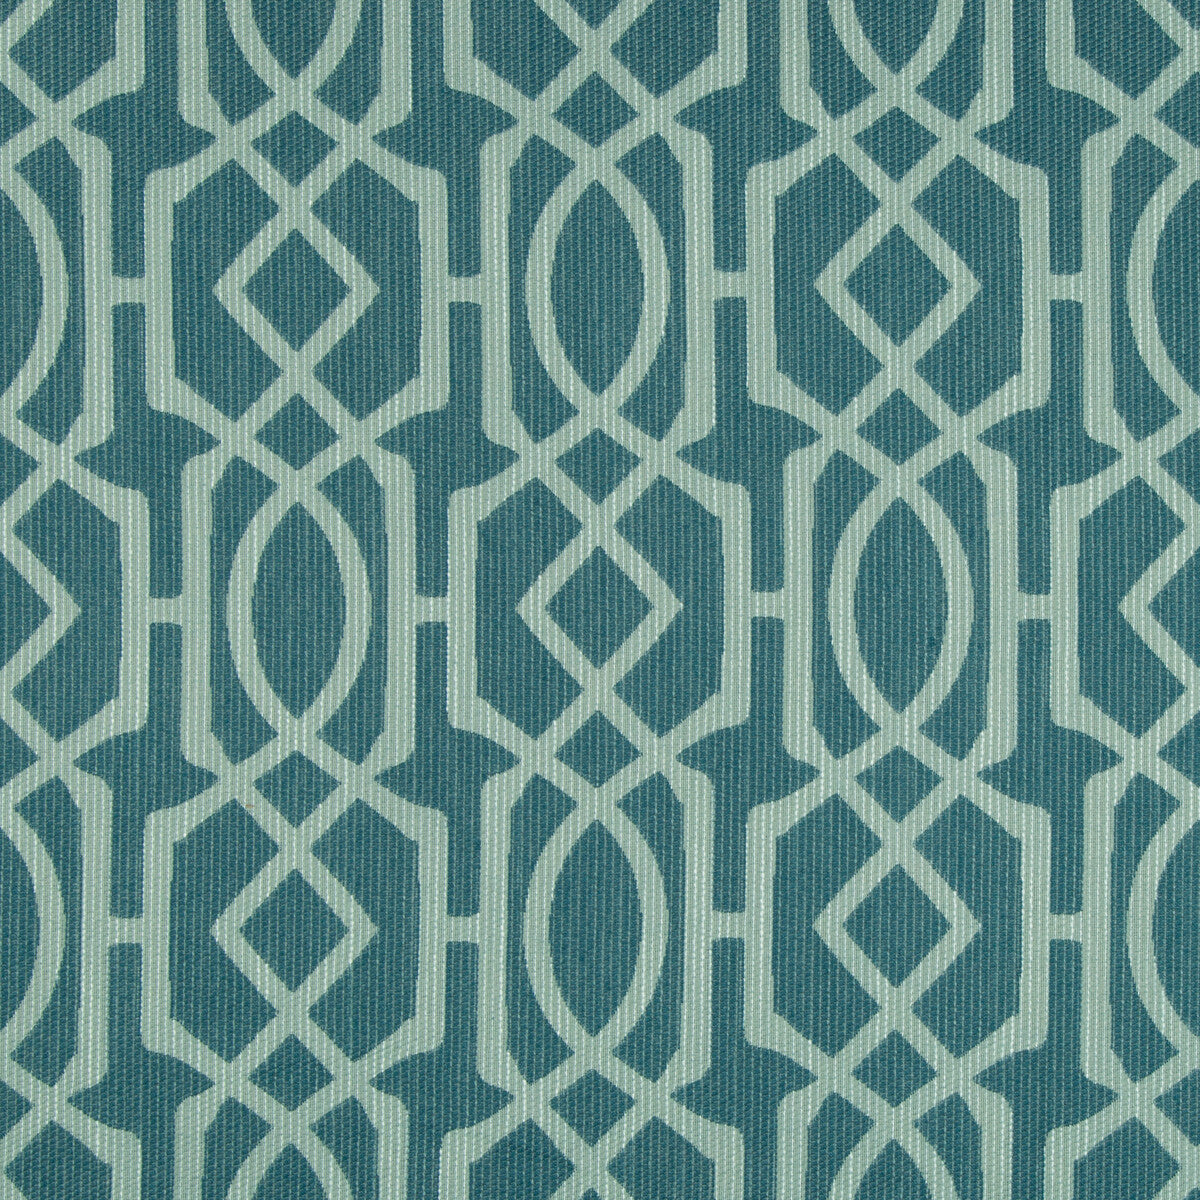 Kravet Contract fabric in 34762-35 color - pattern 34762.35.0 - by Kravet Contract in the Incase Crypton Gis collection